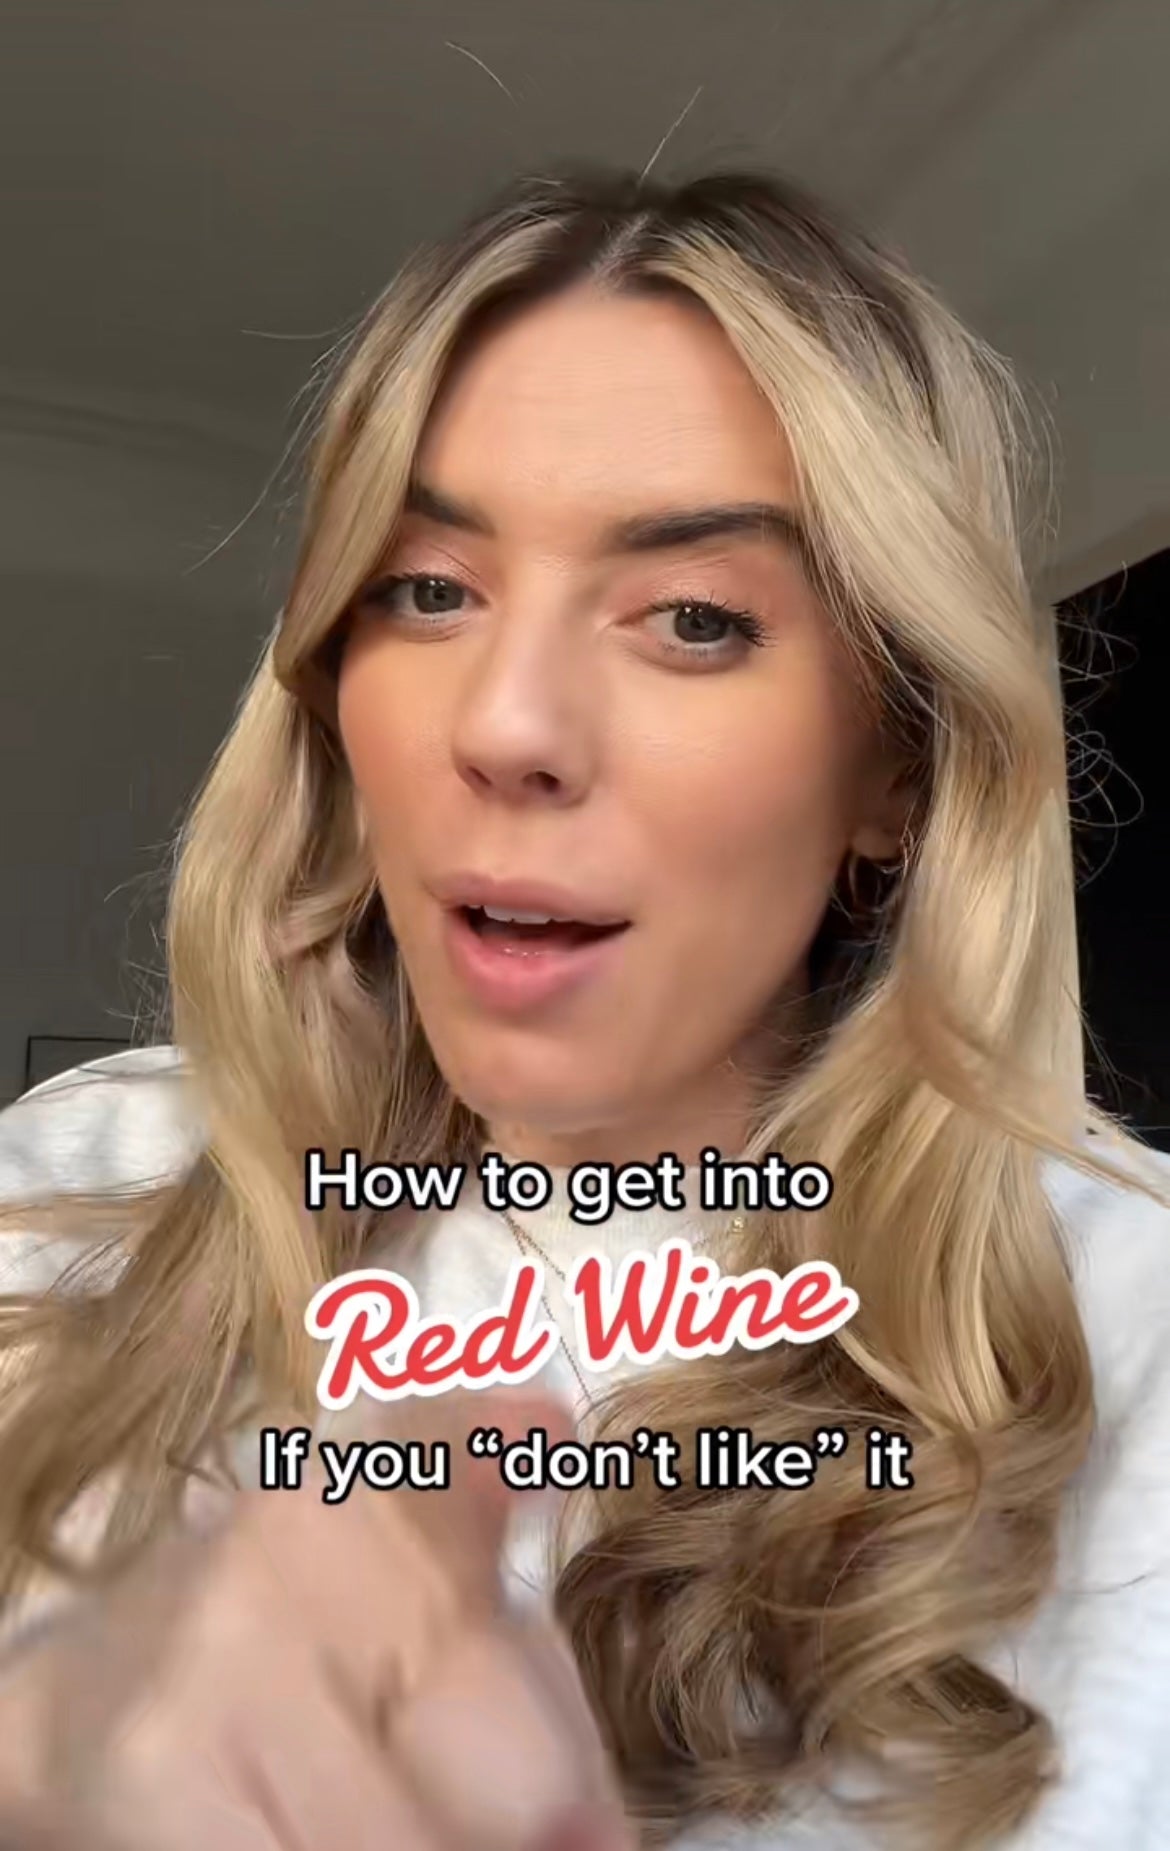 How to get into Red Wine if you think you don't like it